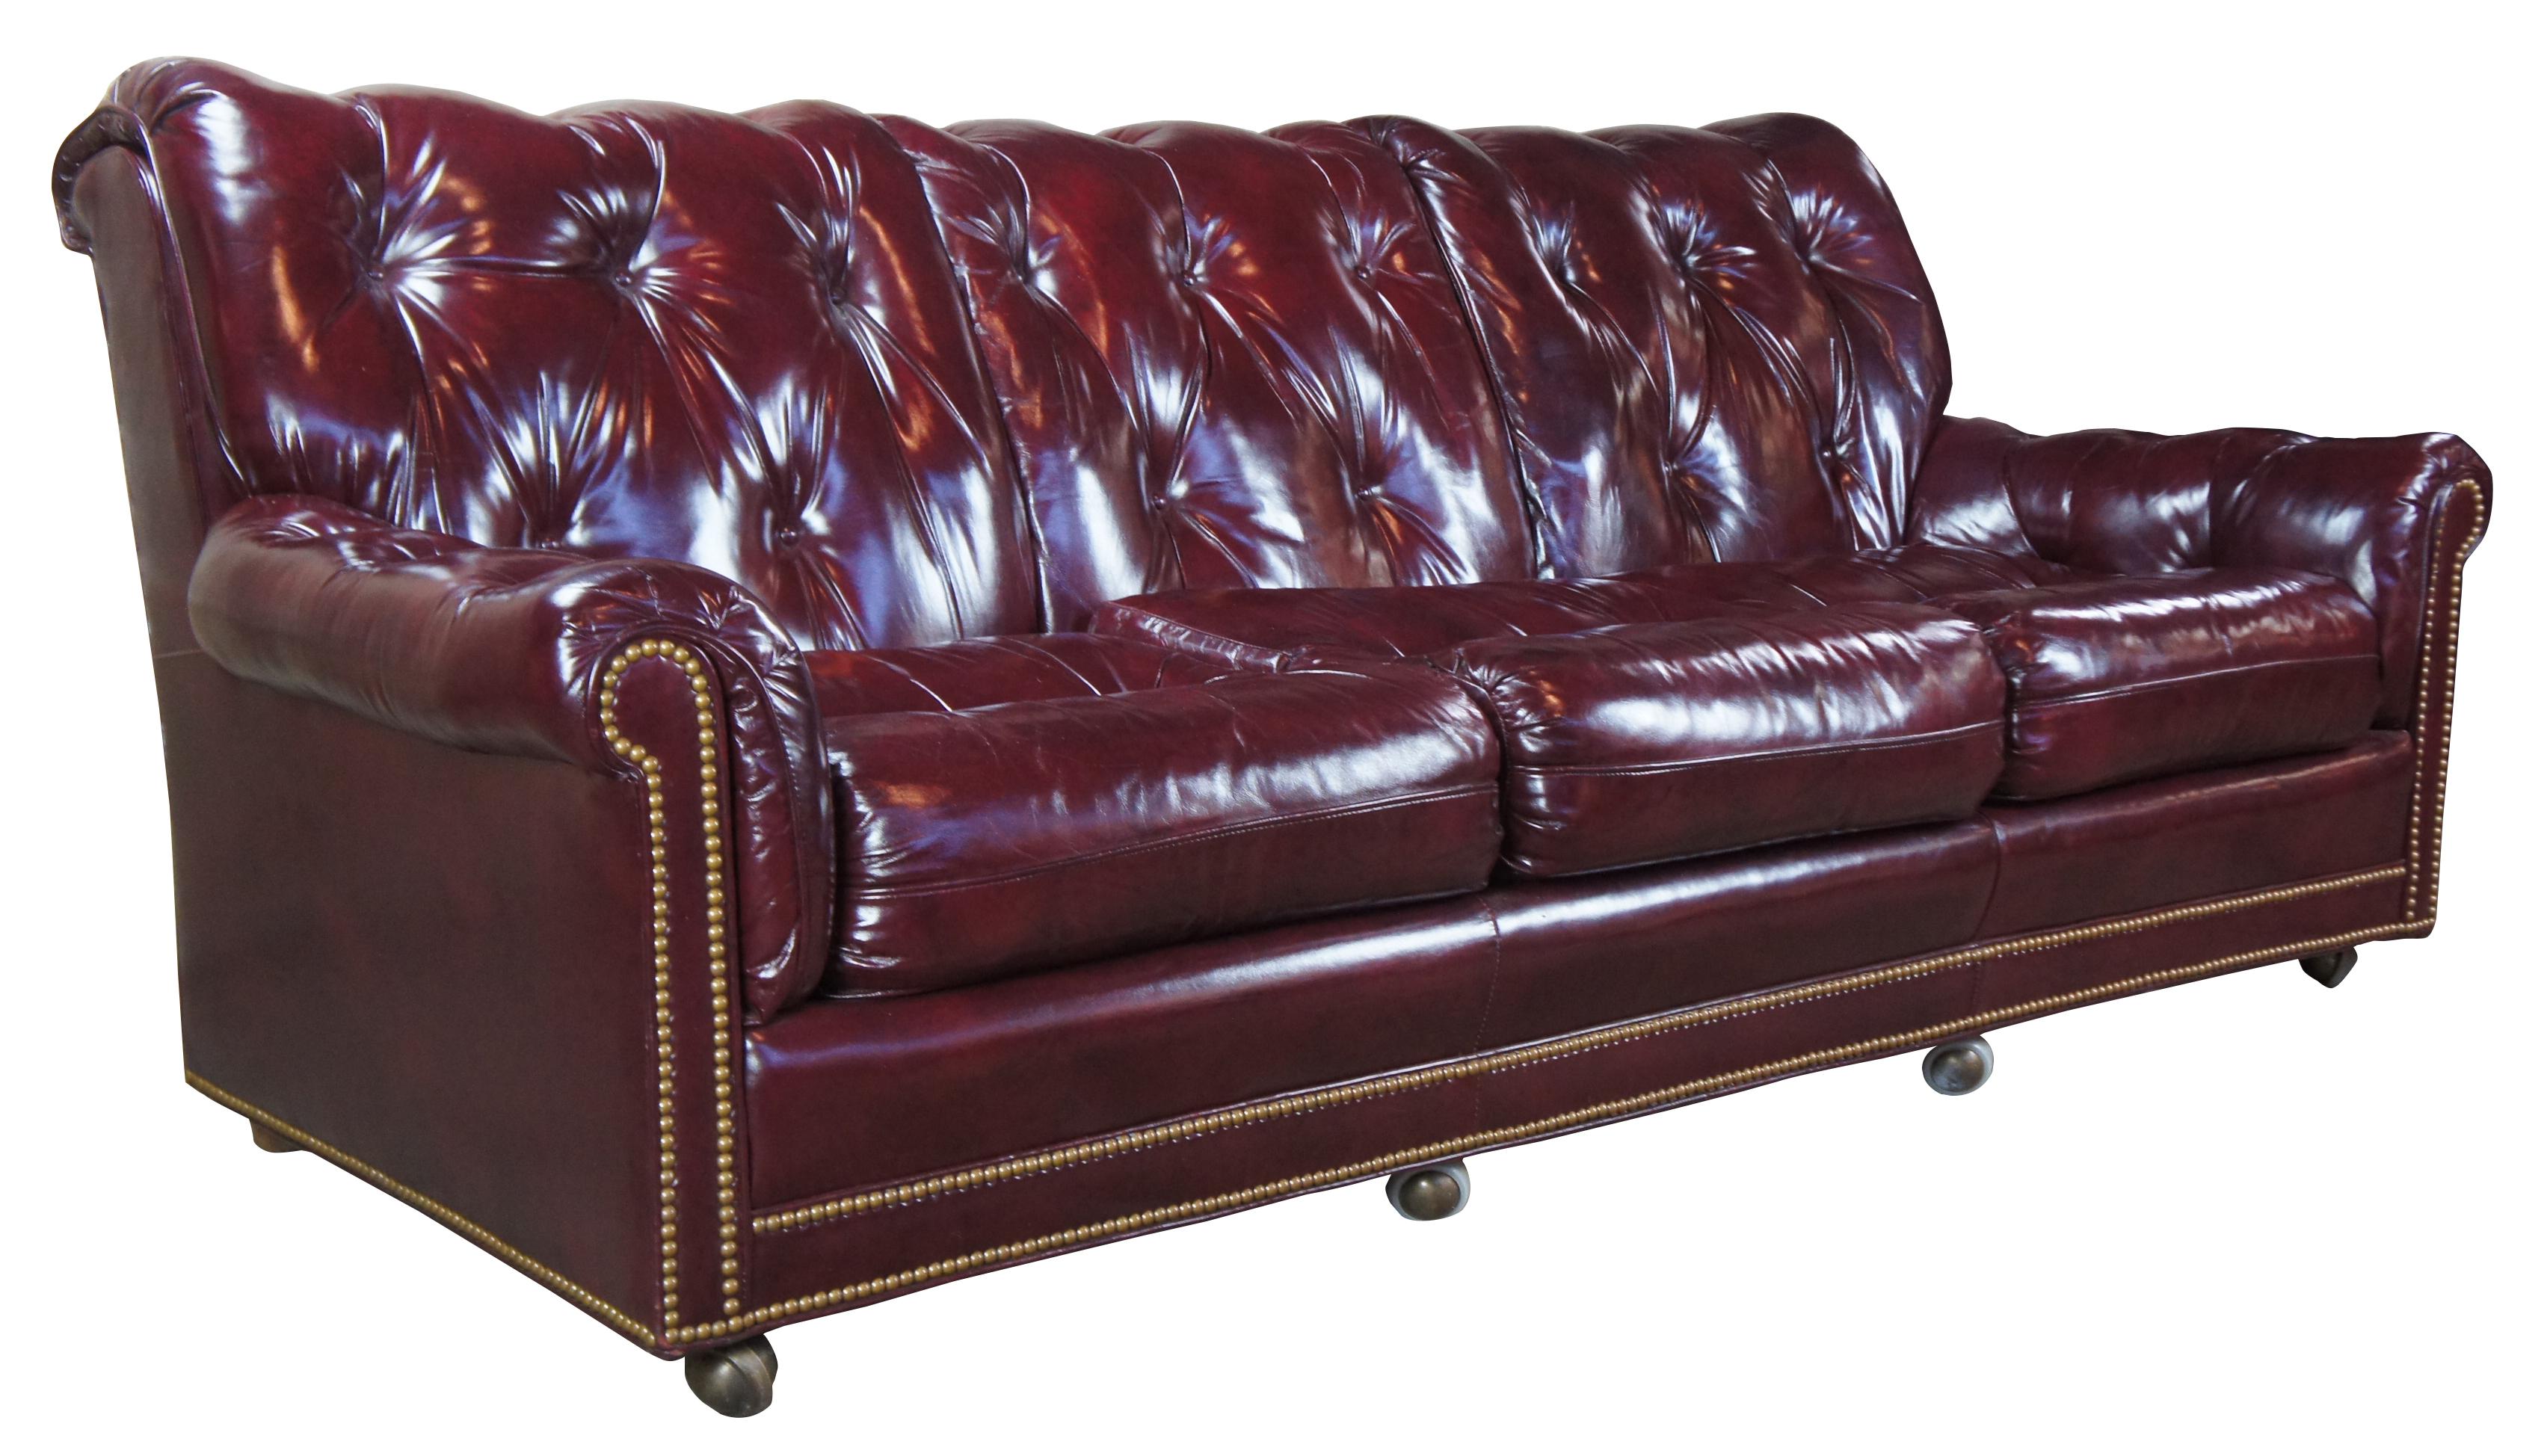 Vintage Hancock & Moore top grain leather sofa. Features a burgundy or dark red tufted leather and plush rolled back with brass nailhead trim, circa 1980s. On castors for ease of movement. Measure: 87